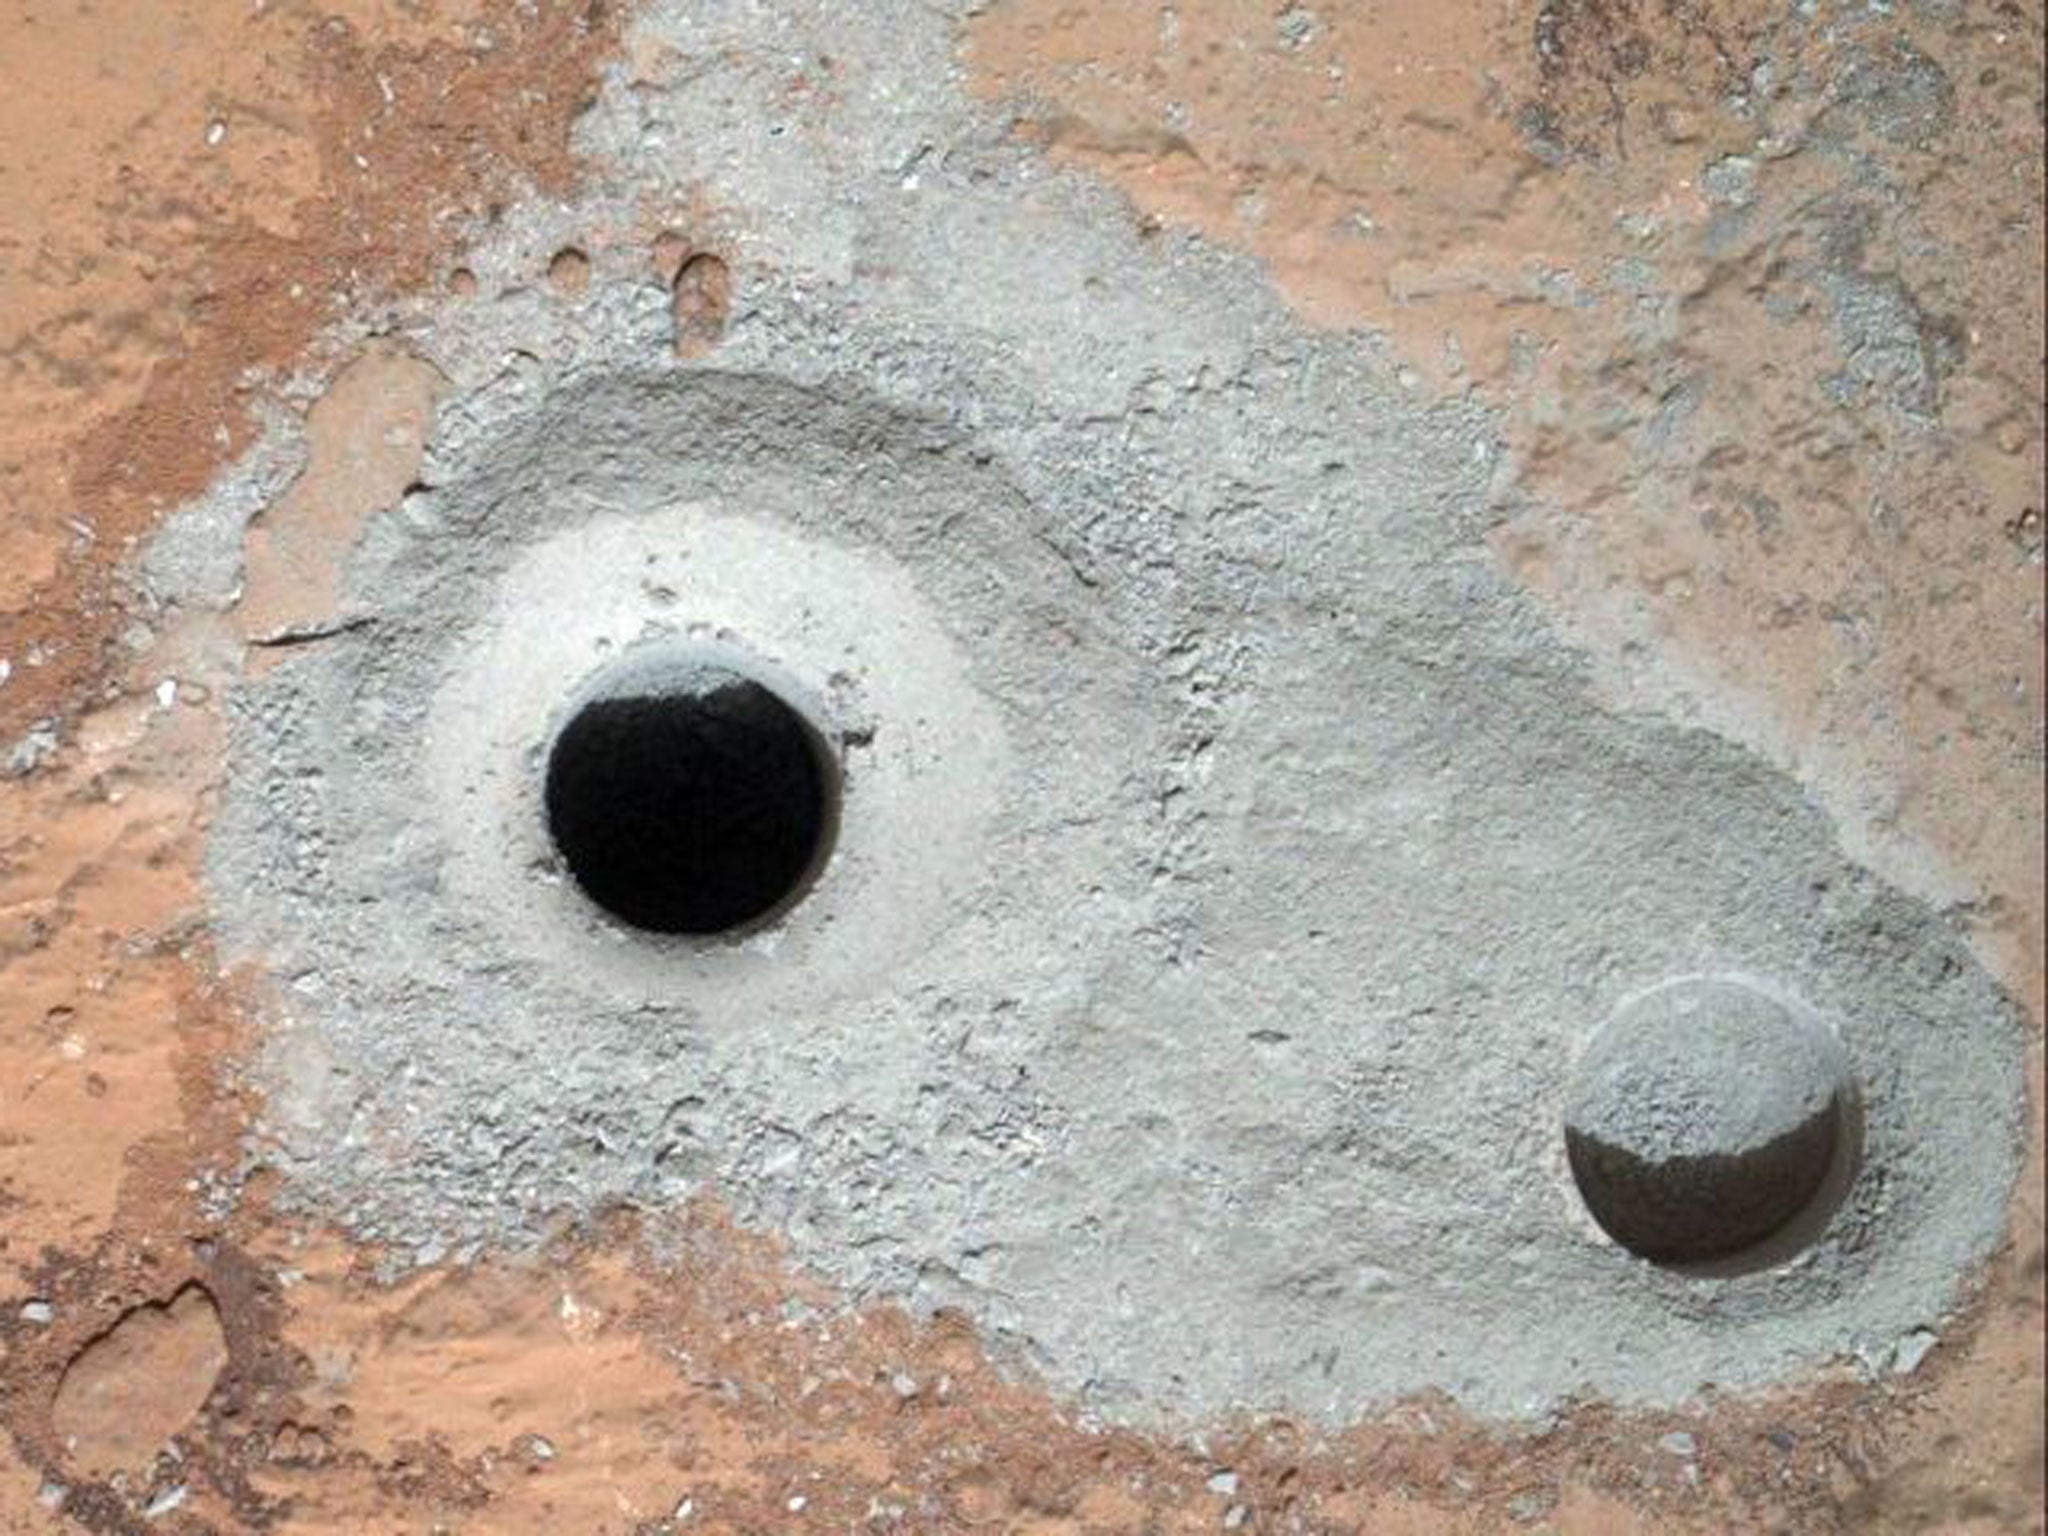 This image released by NASA on Saturday Feb. 9, 2013 shows a fresh drill hole, center, made by the Curiosity rover